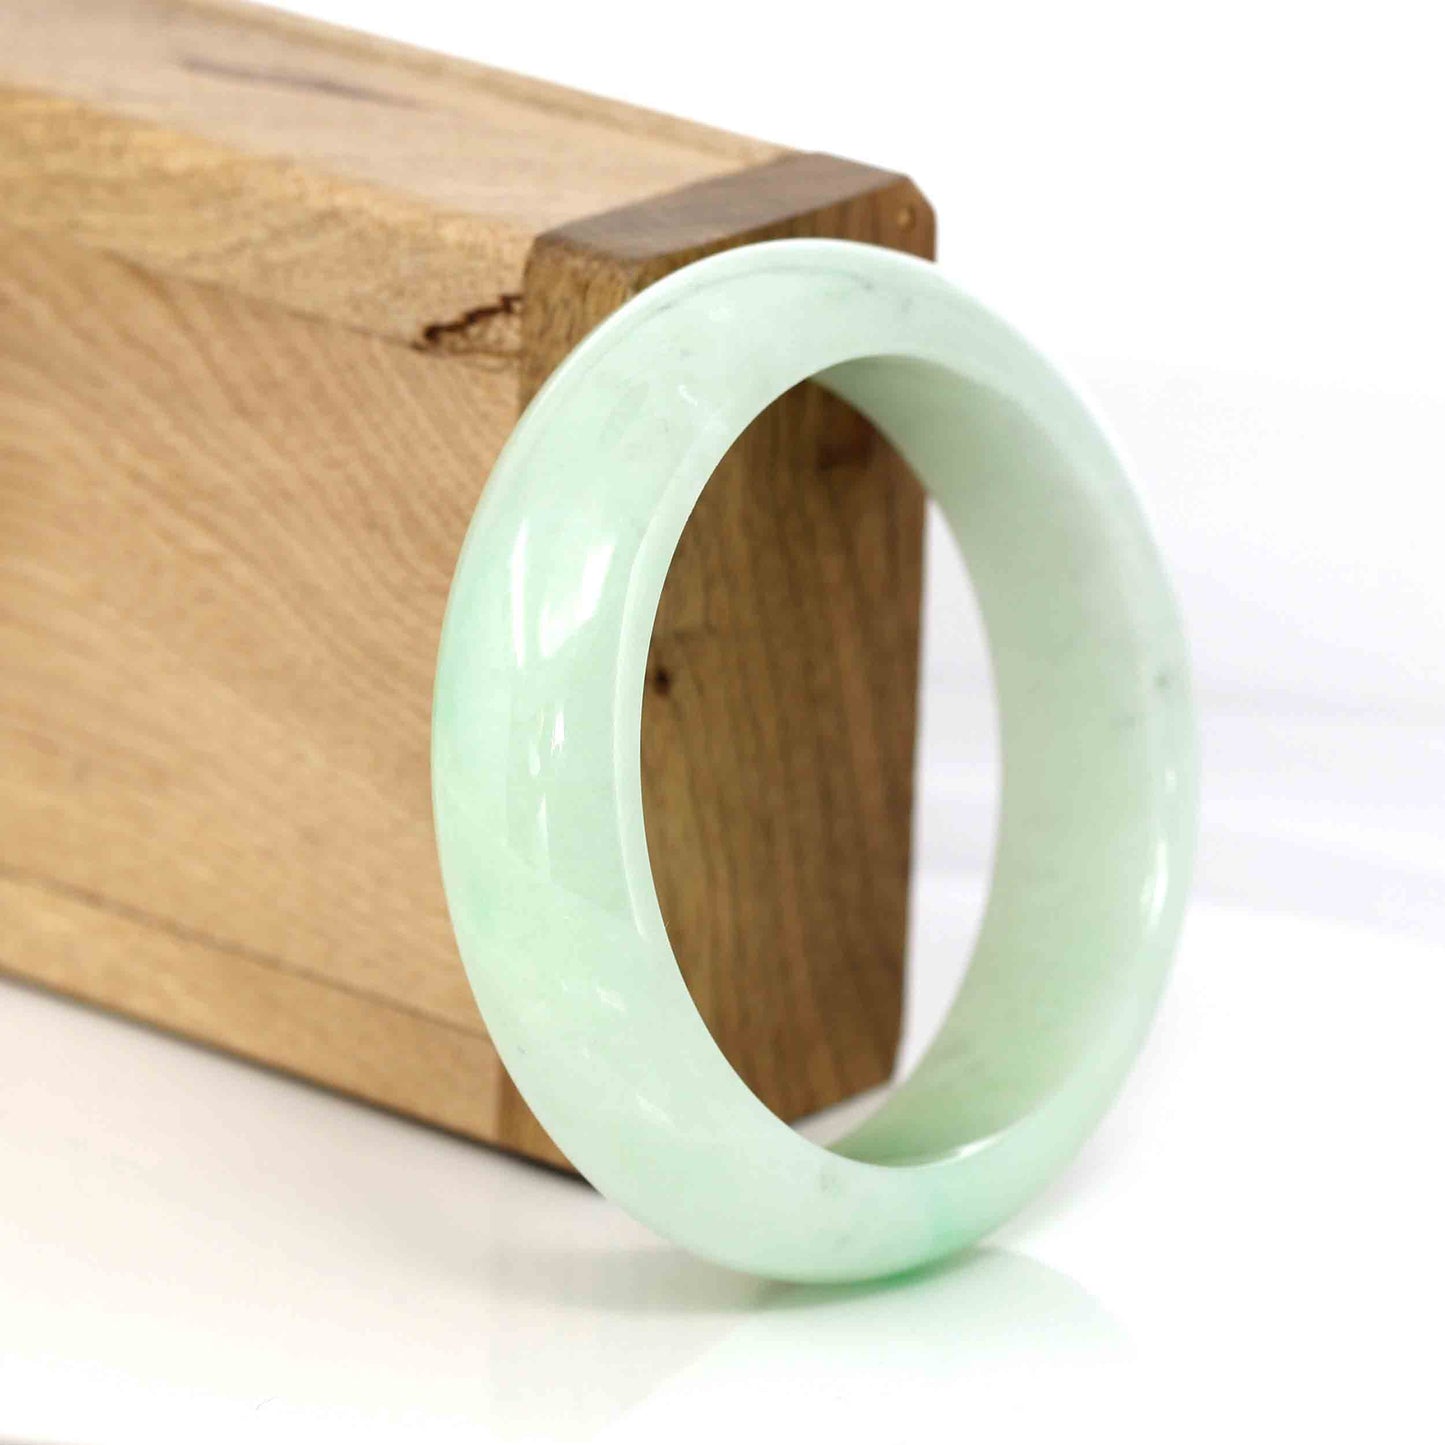 Load image into Gallery viewer, High-quality Lavender-Green Natural Burmese Jadeite Jade Bangle (54.89 mm ) #327
